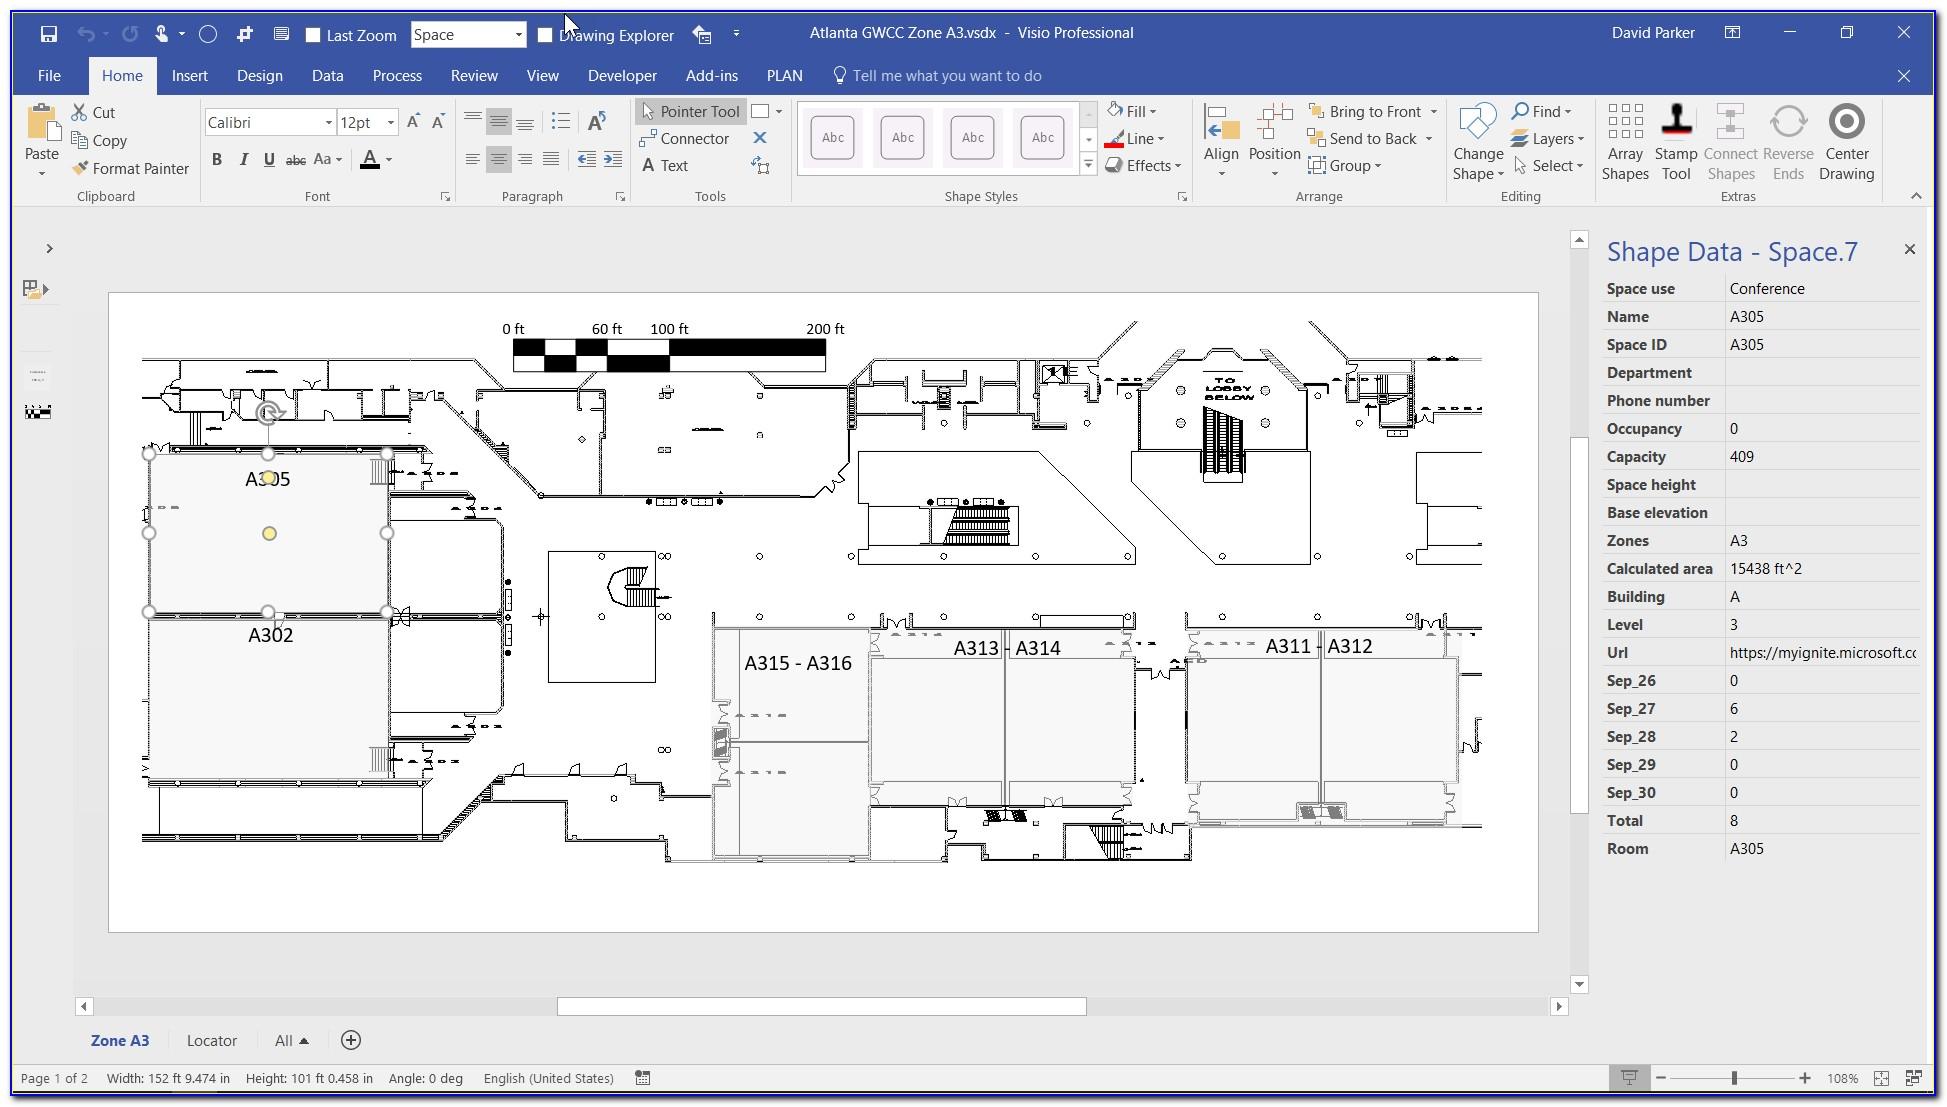 List Of All Visio 2010 Shapes